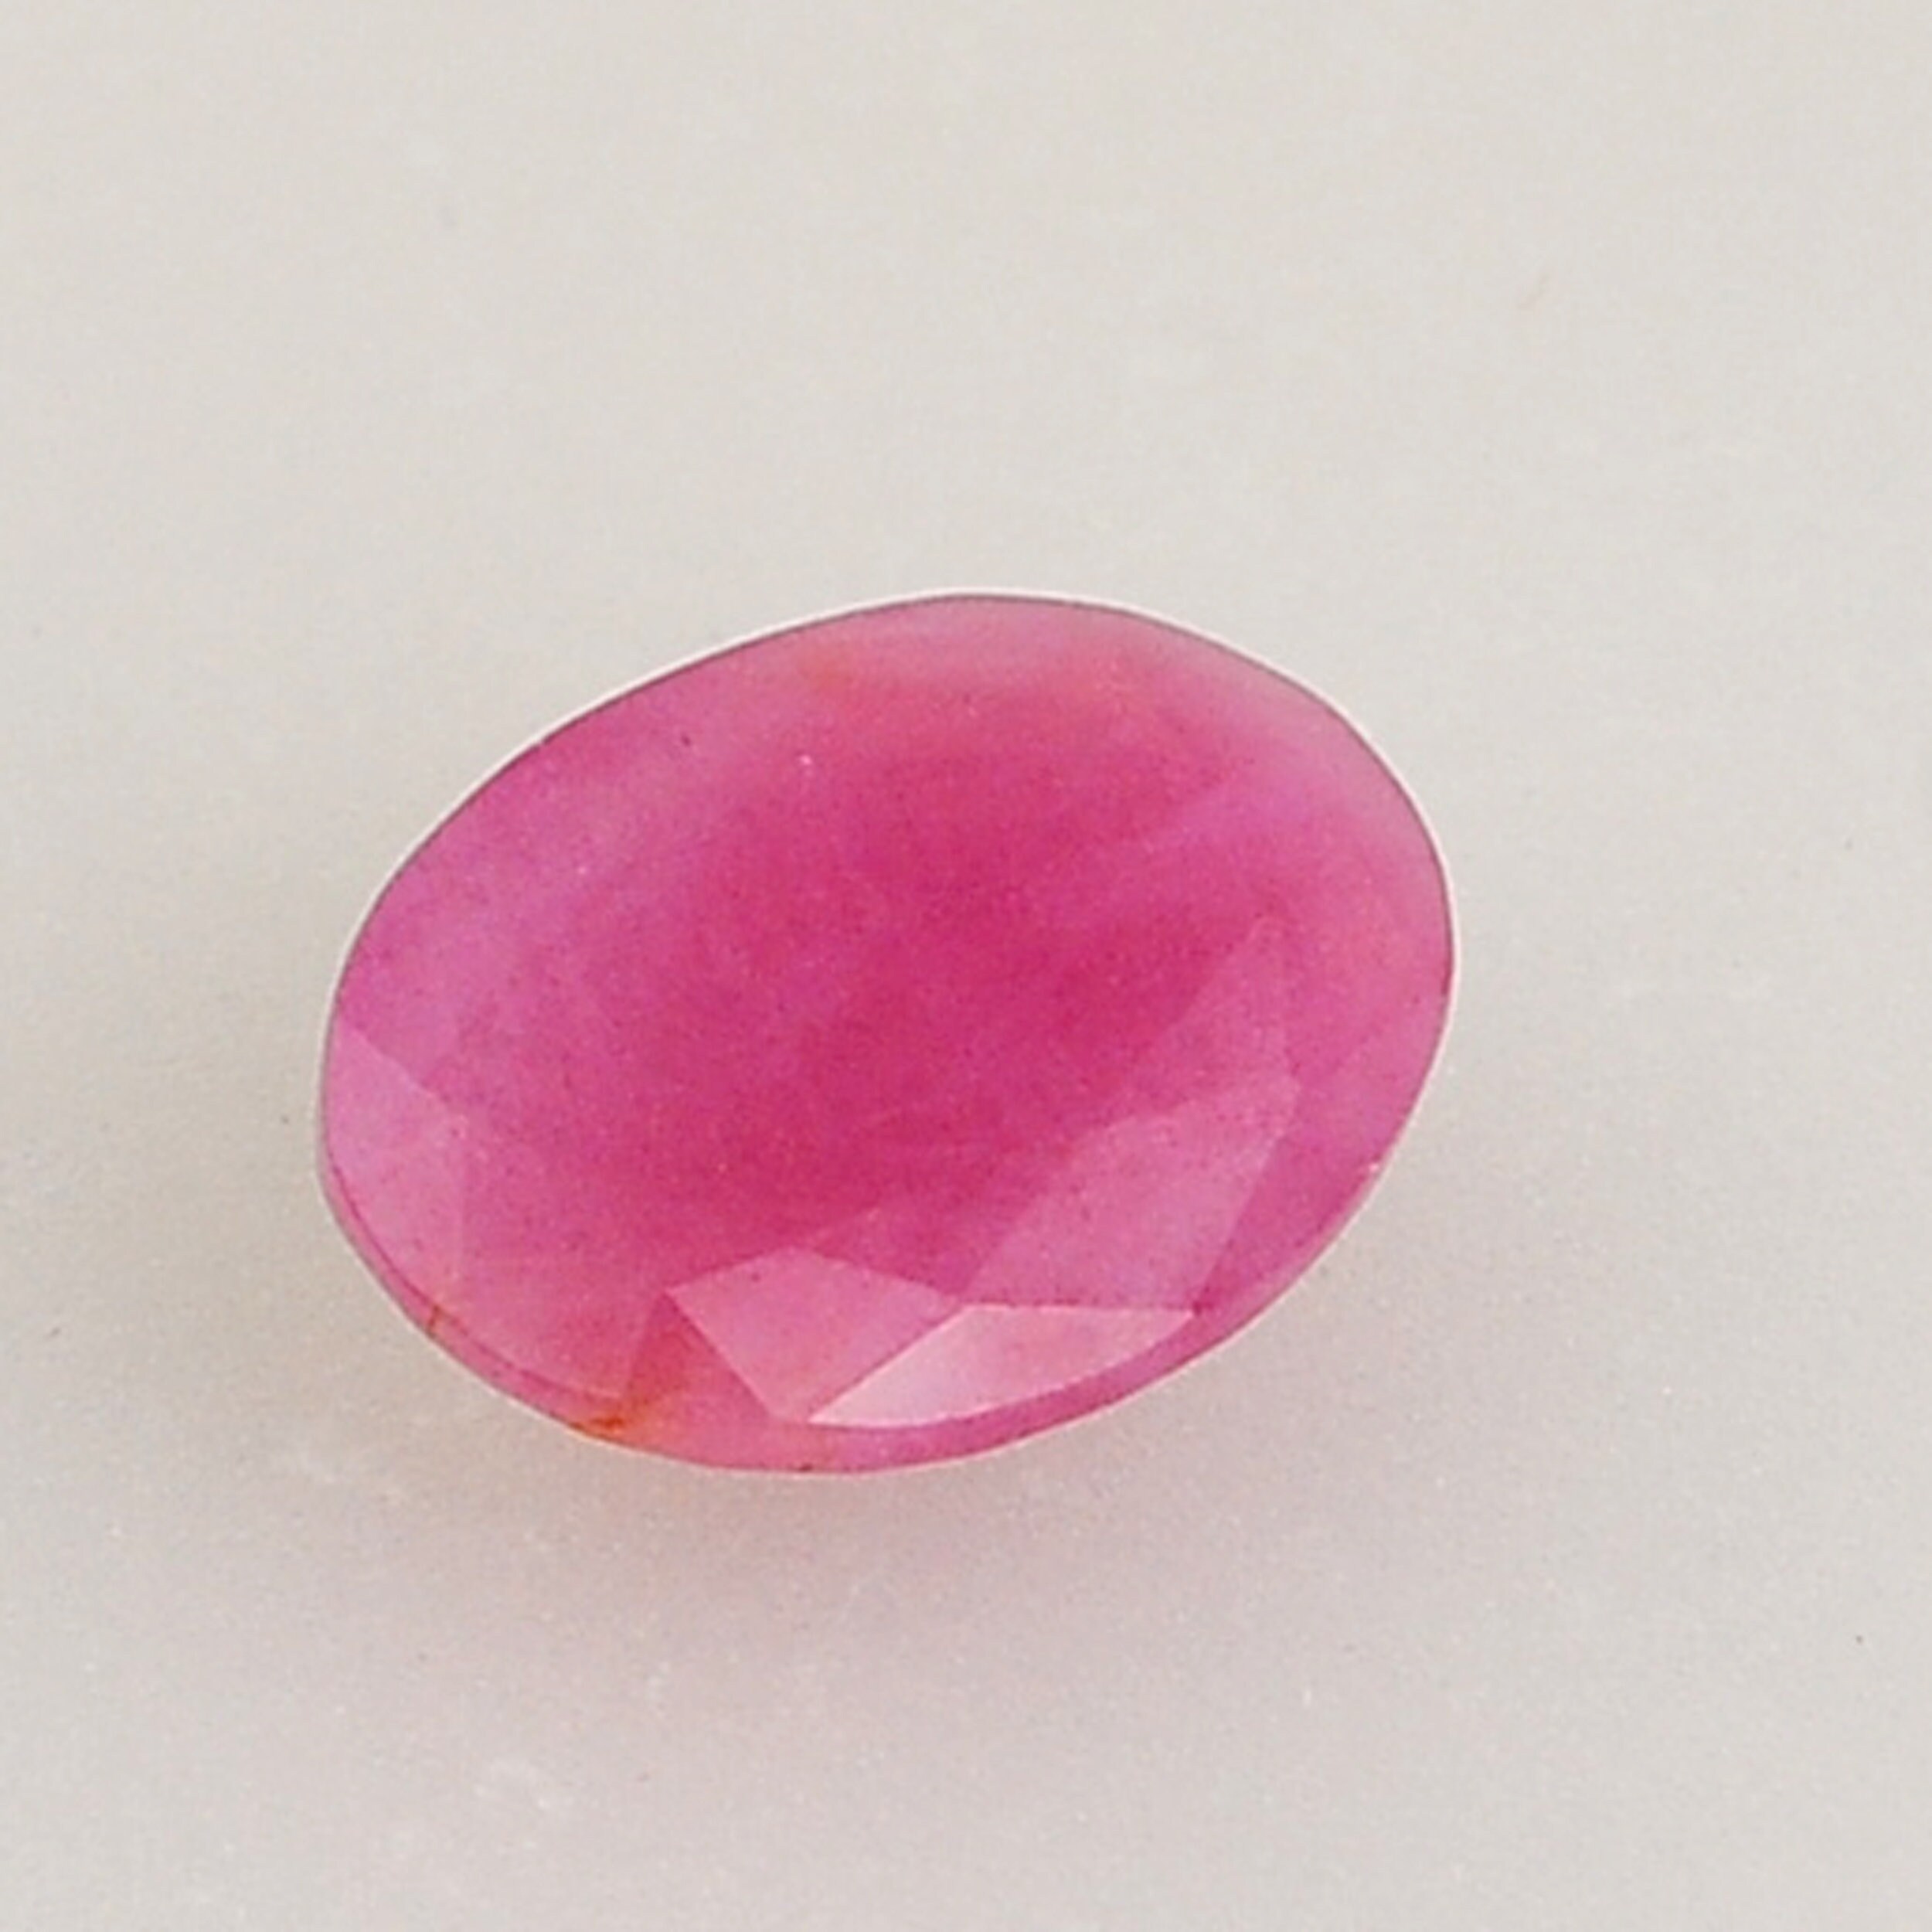 5 Carat 1 Pieces Natural Octagon Red Ruby Loose Gemstone AAA Quality 100% Natural Gemstones Precious stone 10x8x5 mm jewelry making